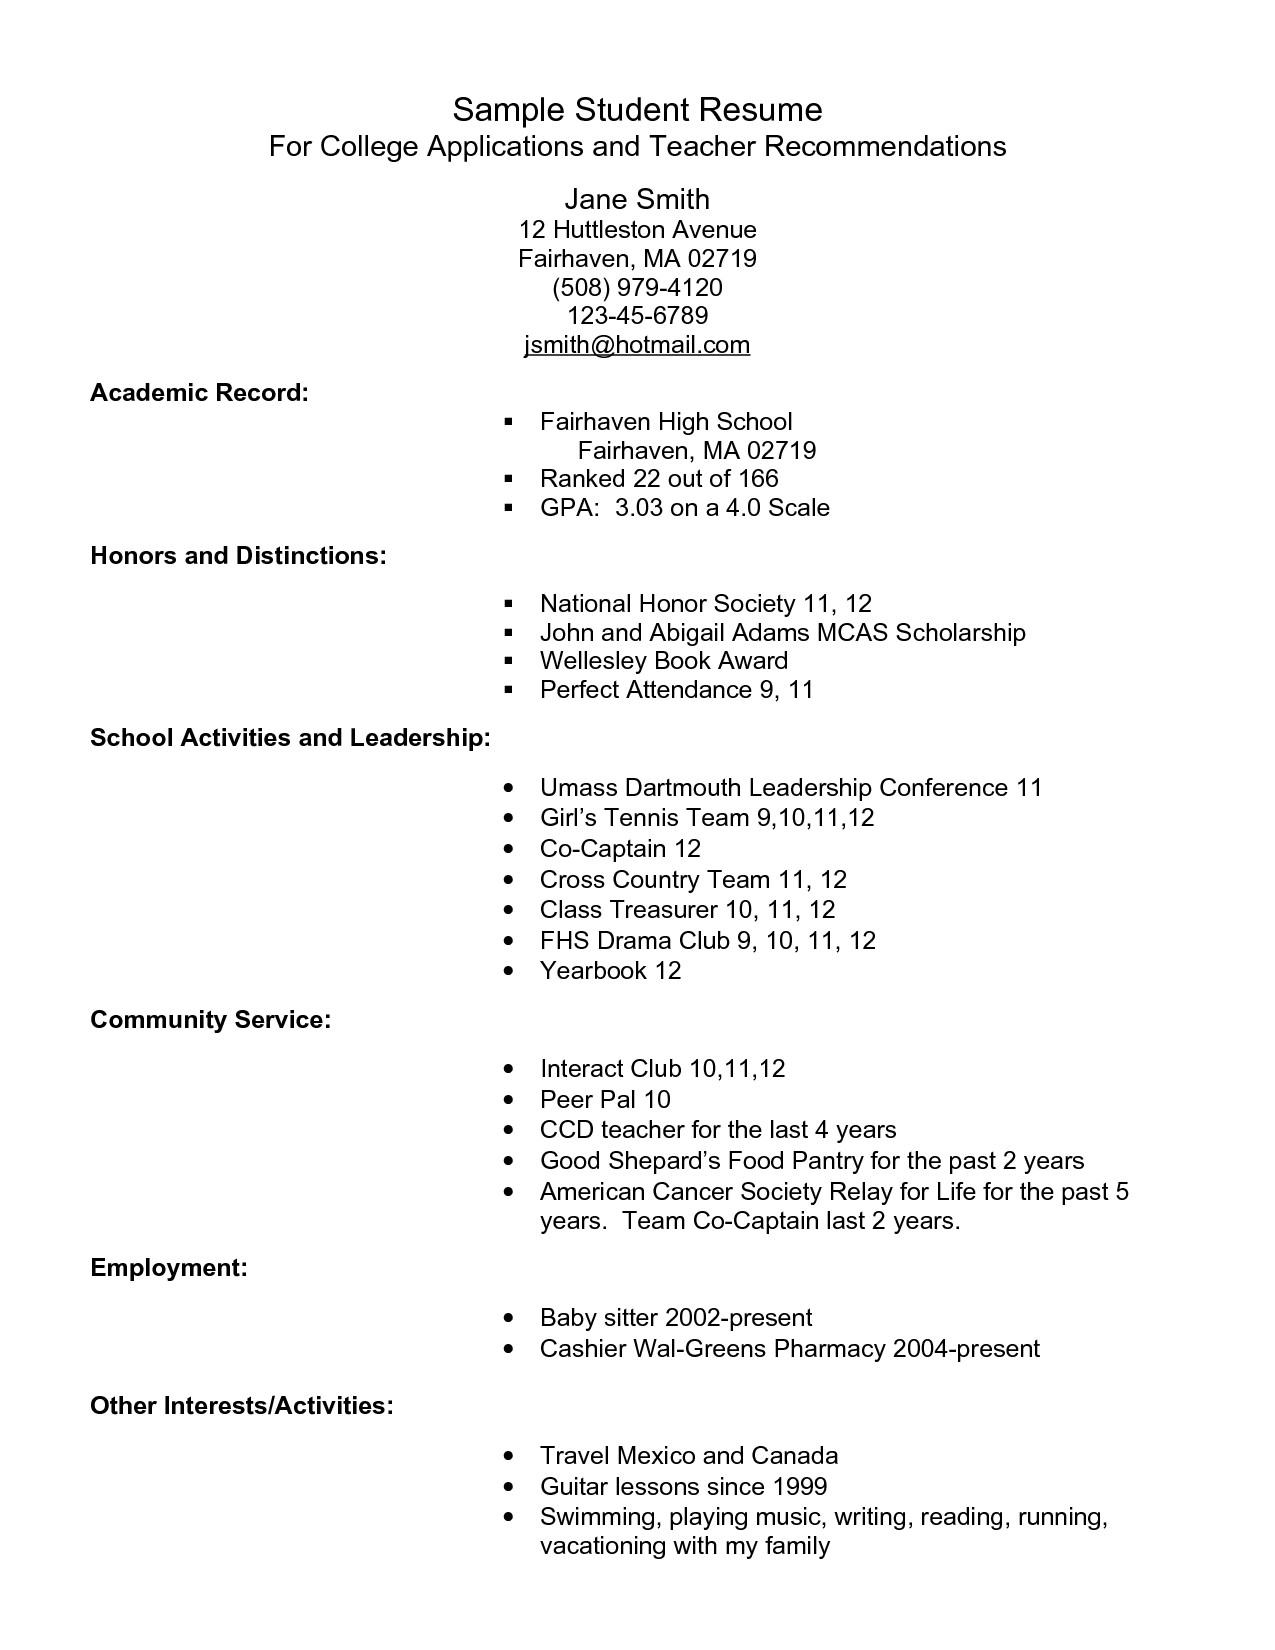 example resume for high school students for college